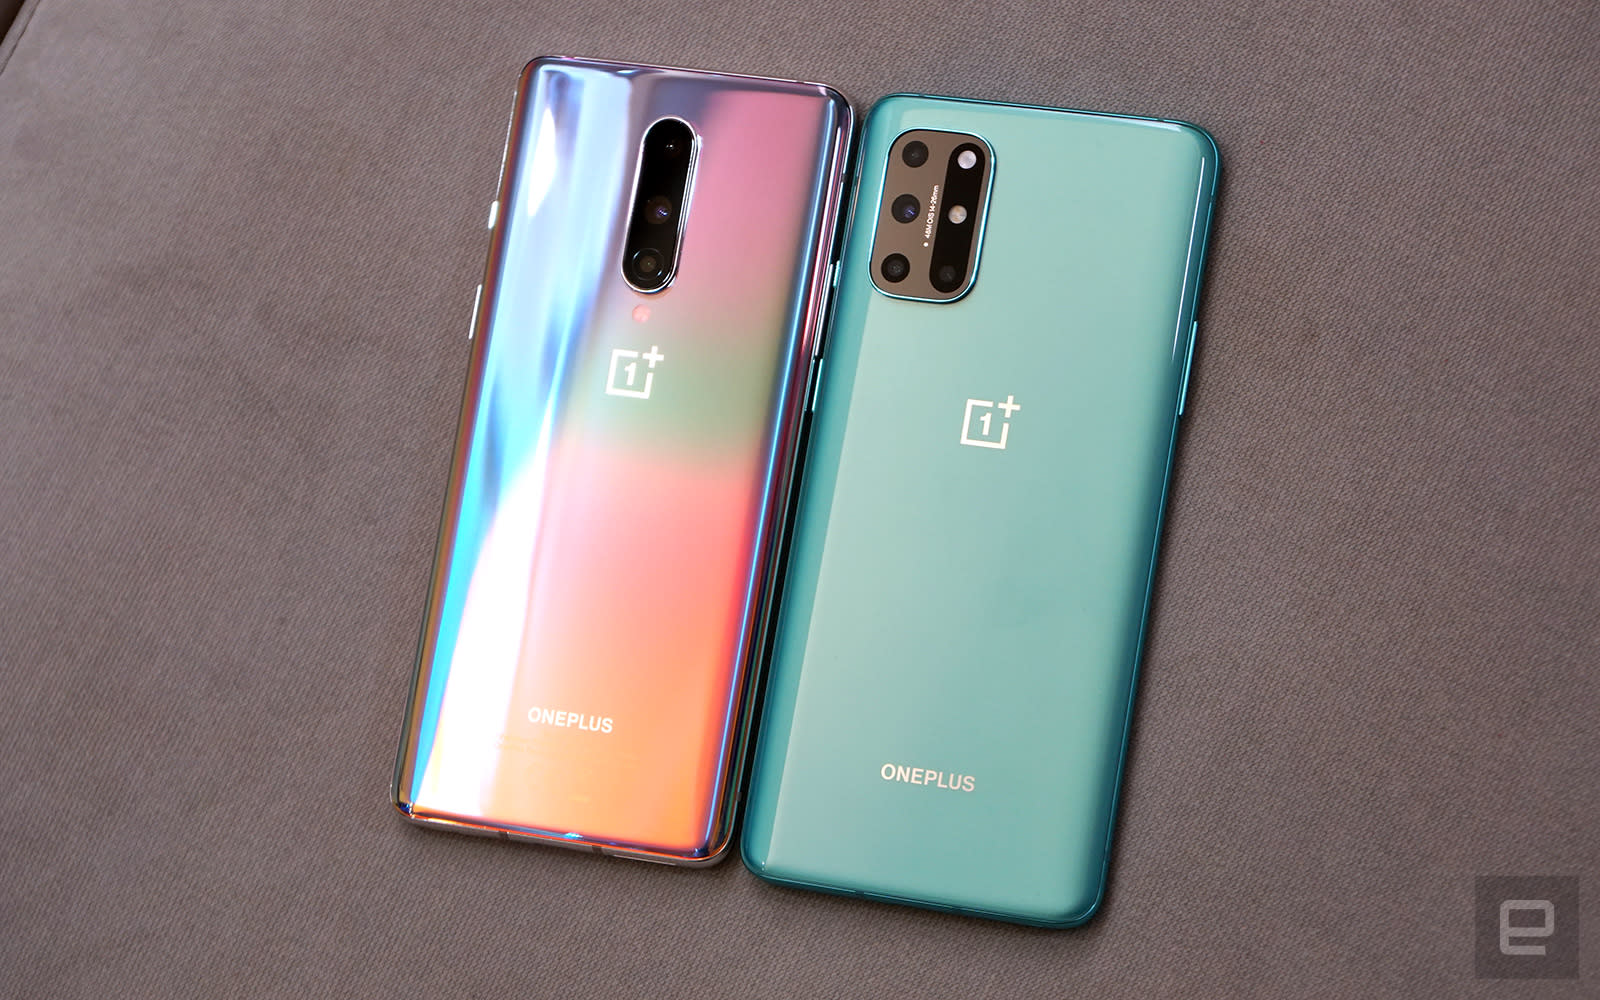 OnePlus’ 8T and 8 Pro smartphones hit record lows ahead of Series 9 launch